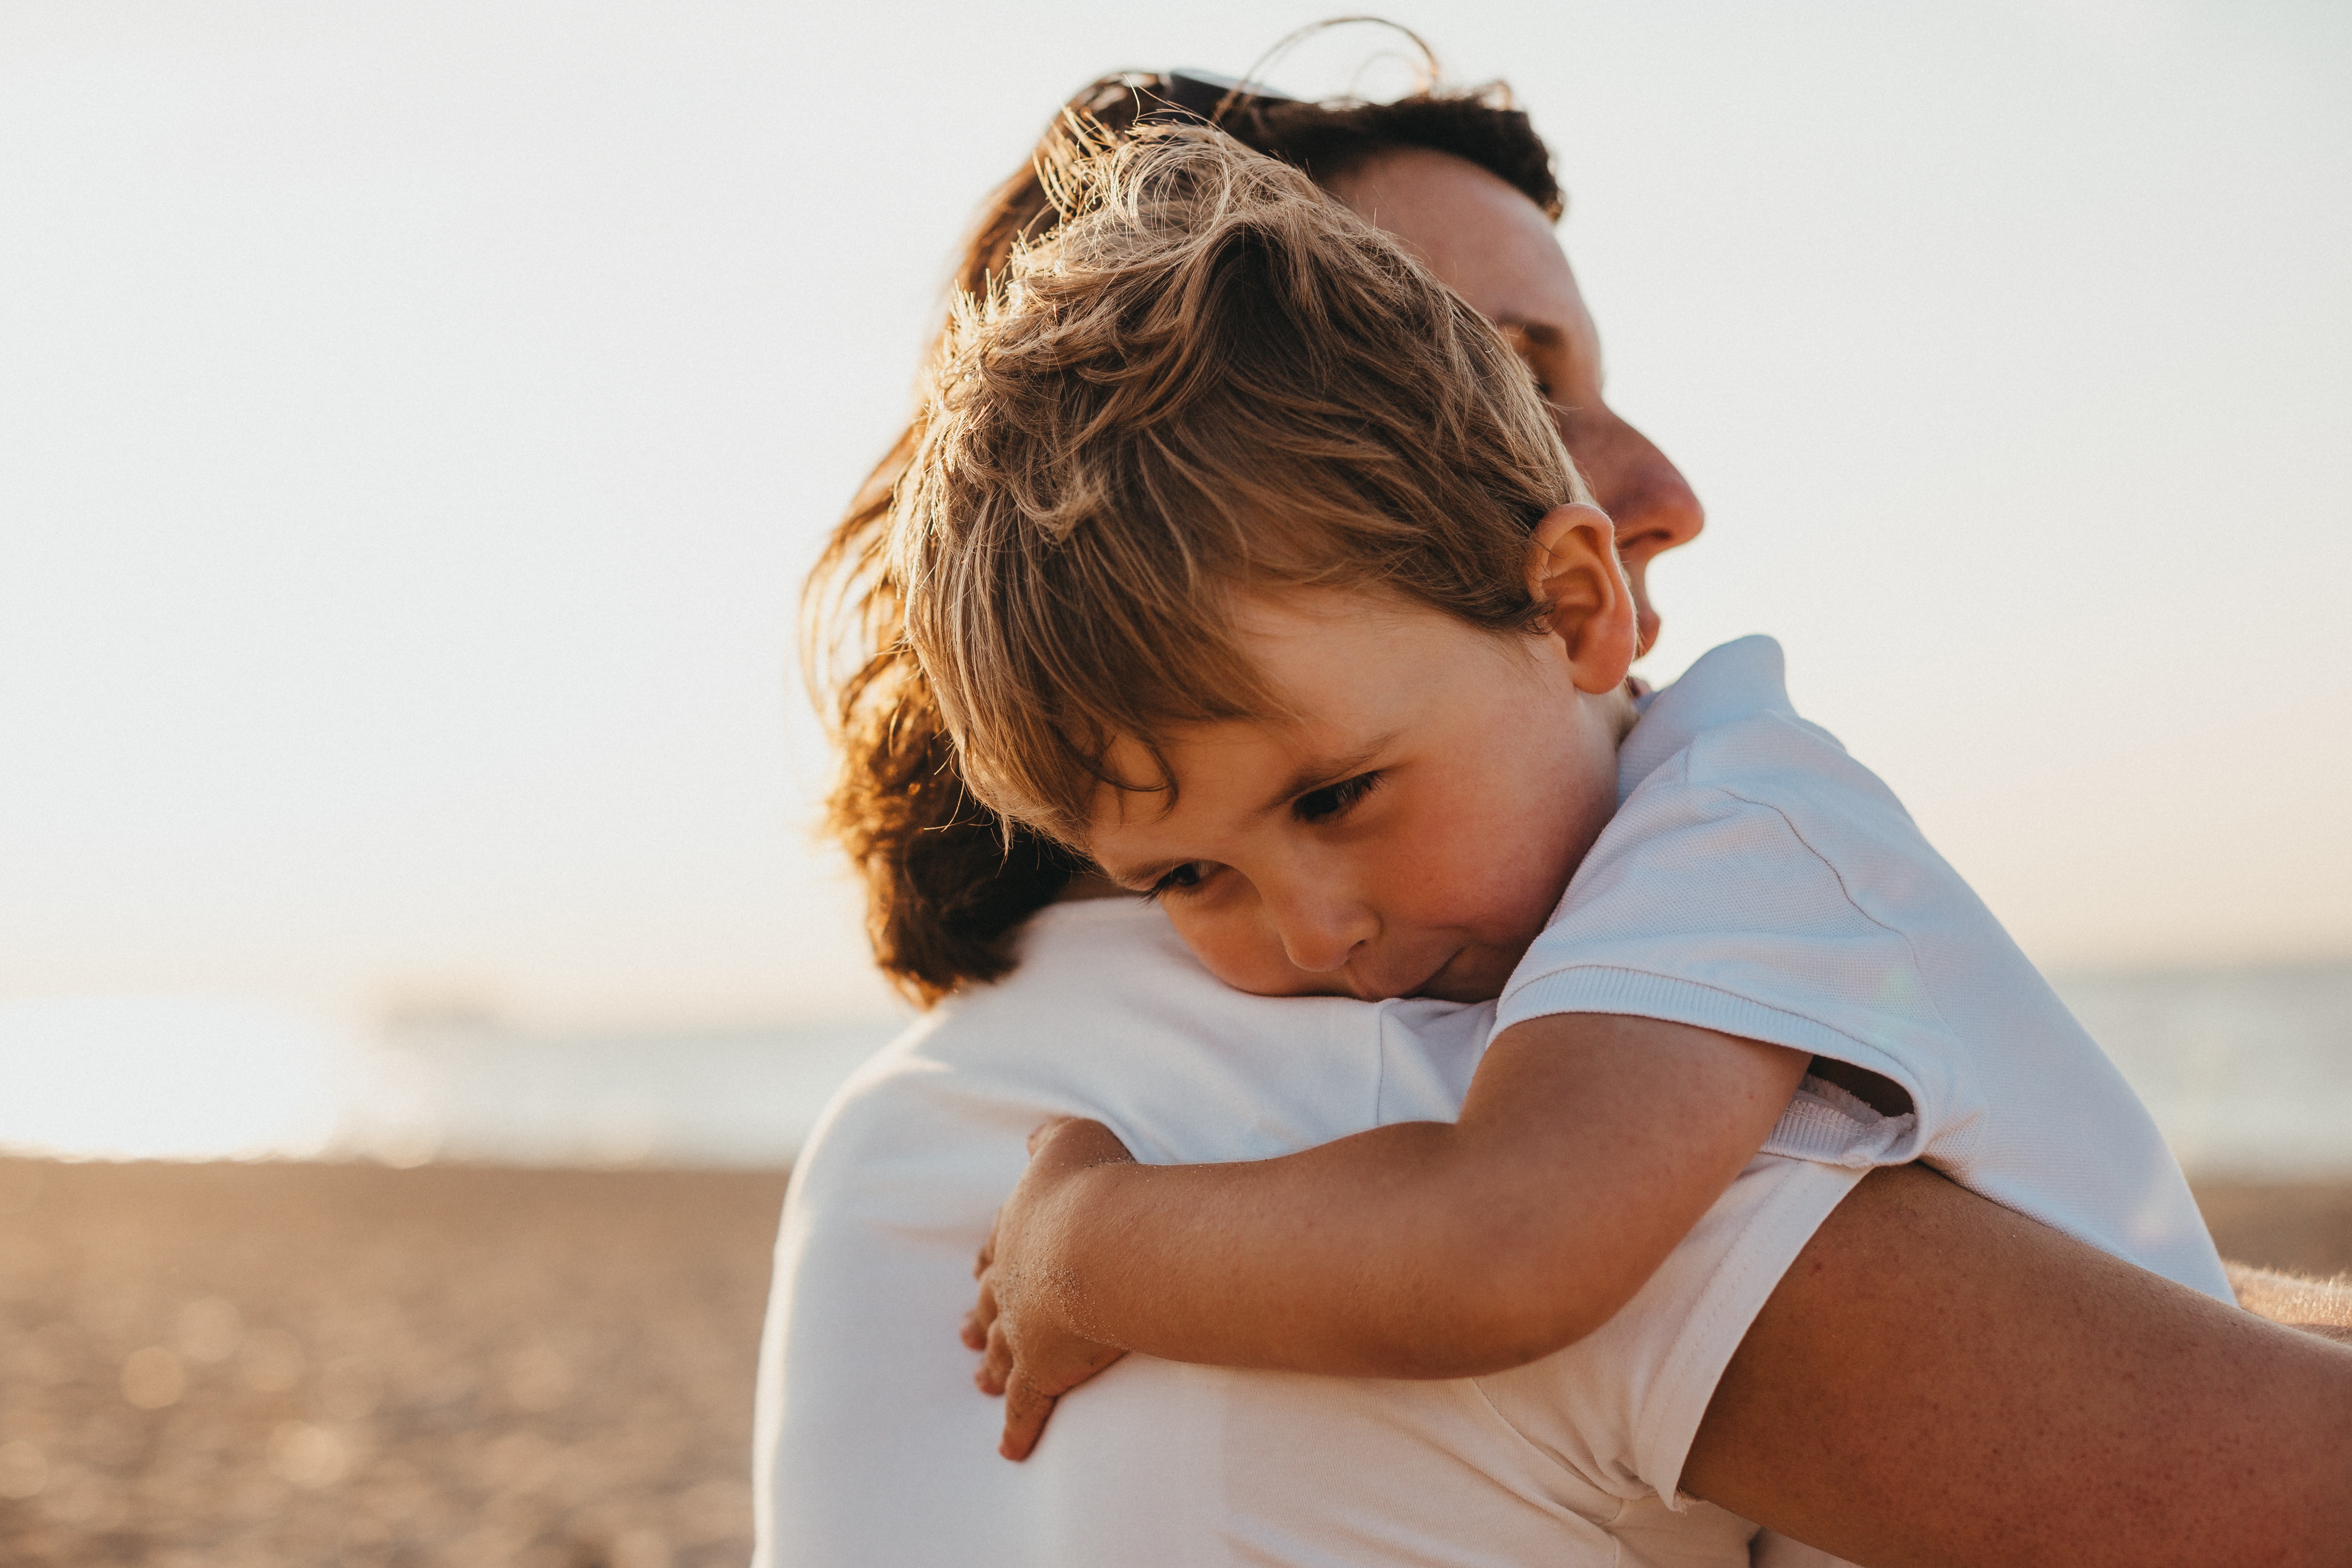 “My child seems to stop his naughty behaviour when I yell at him. But, I am not sure if this is the best way to go about it.” – Let’s look at fear-based parenting.